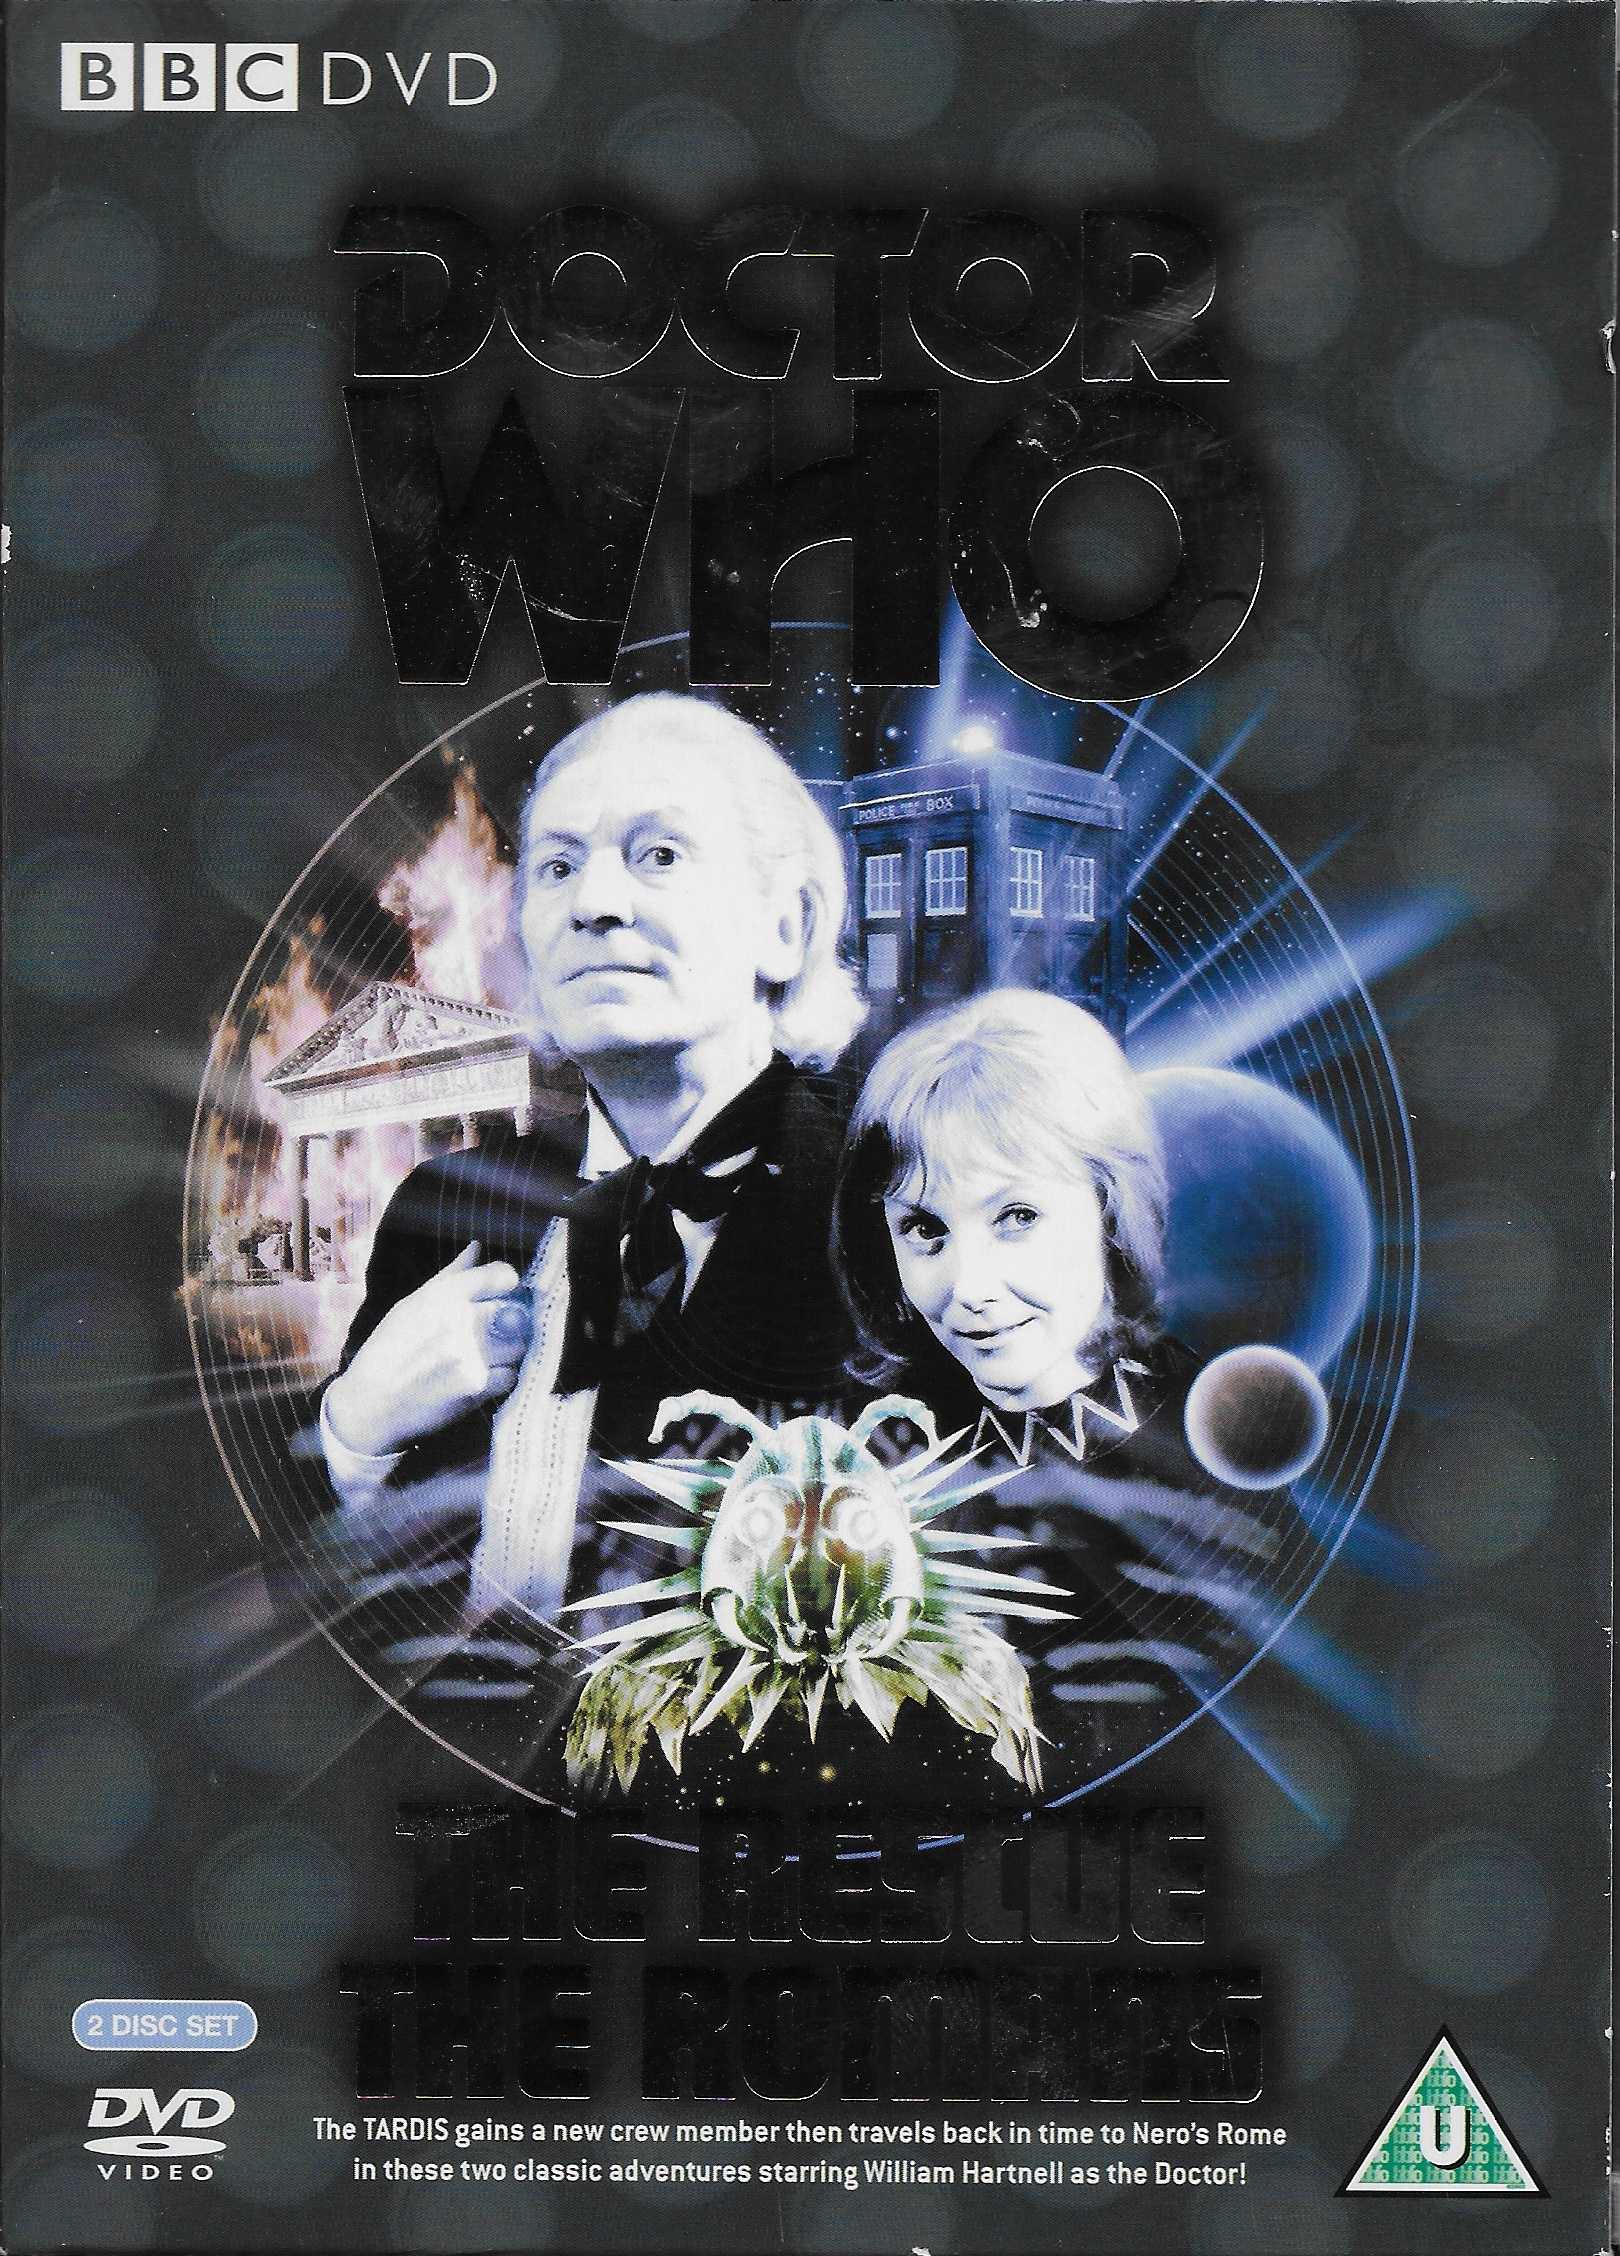 Picture of BBCDVD 2698 Doctor Who - The rescue / The Romans by artist Terry Nation / Dennis Spooner from the BBC dvds - Records and Tapes library